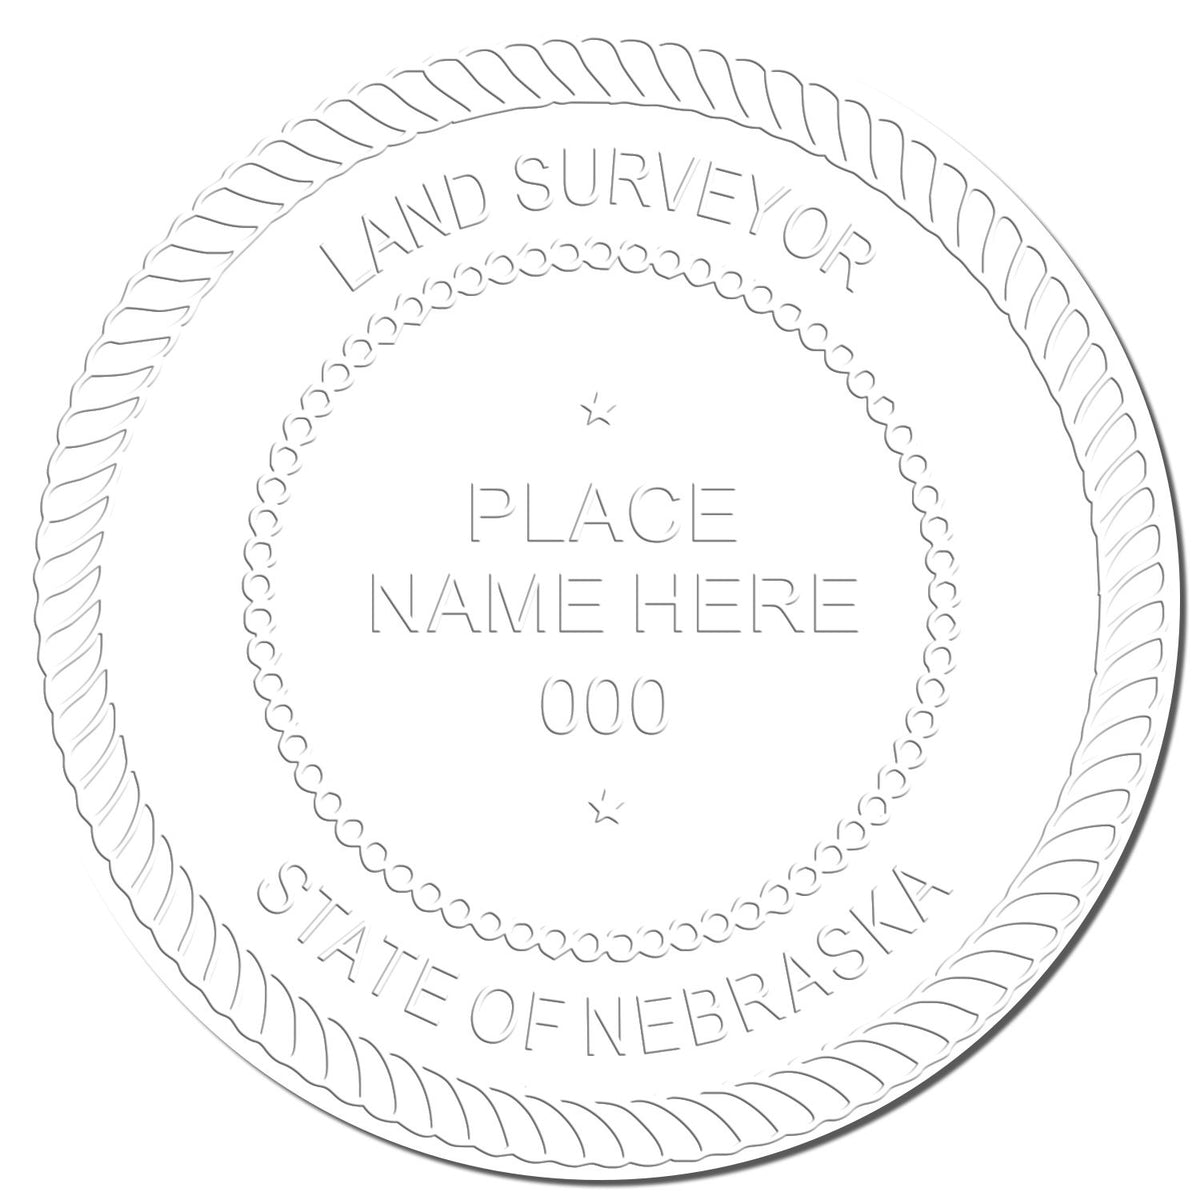 This paper is stamped with a sample imprint of the Handheld Nebraska Land Surveyor Seal, signifying its quality and reliability.